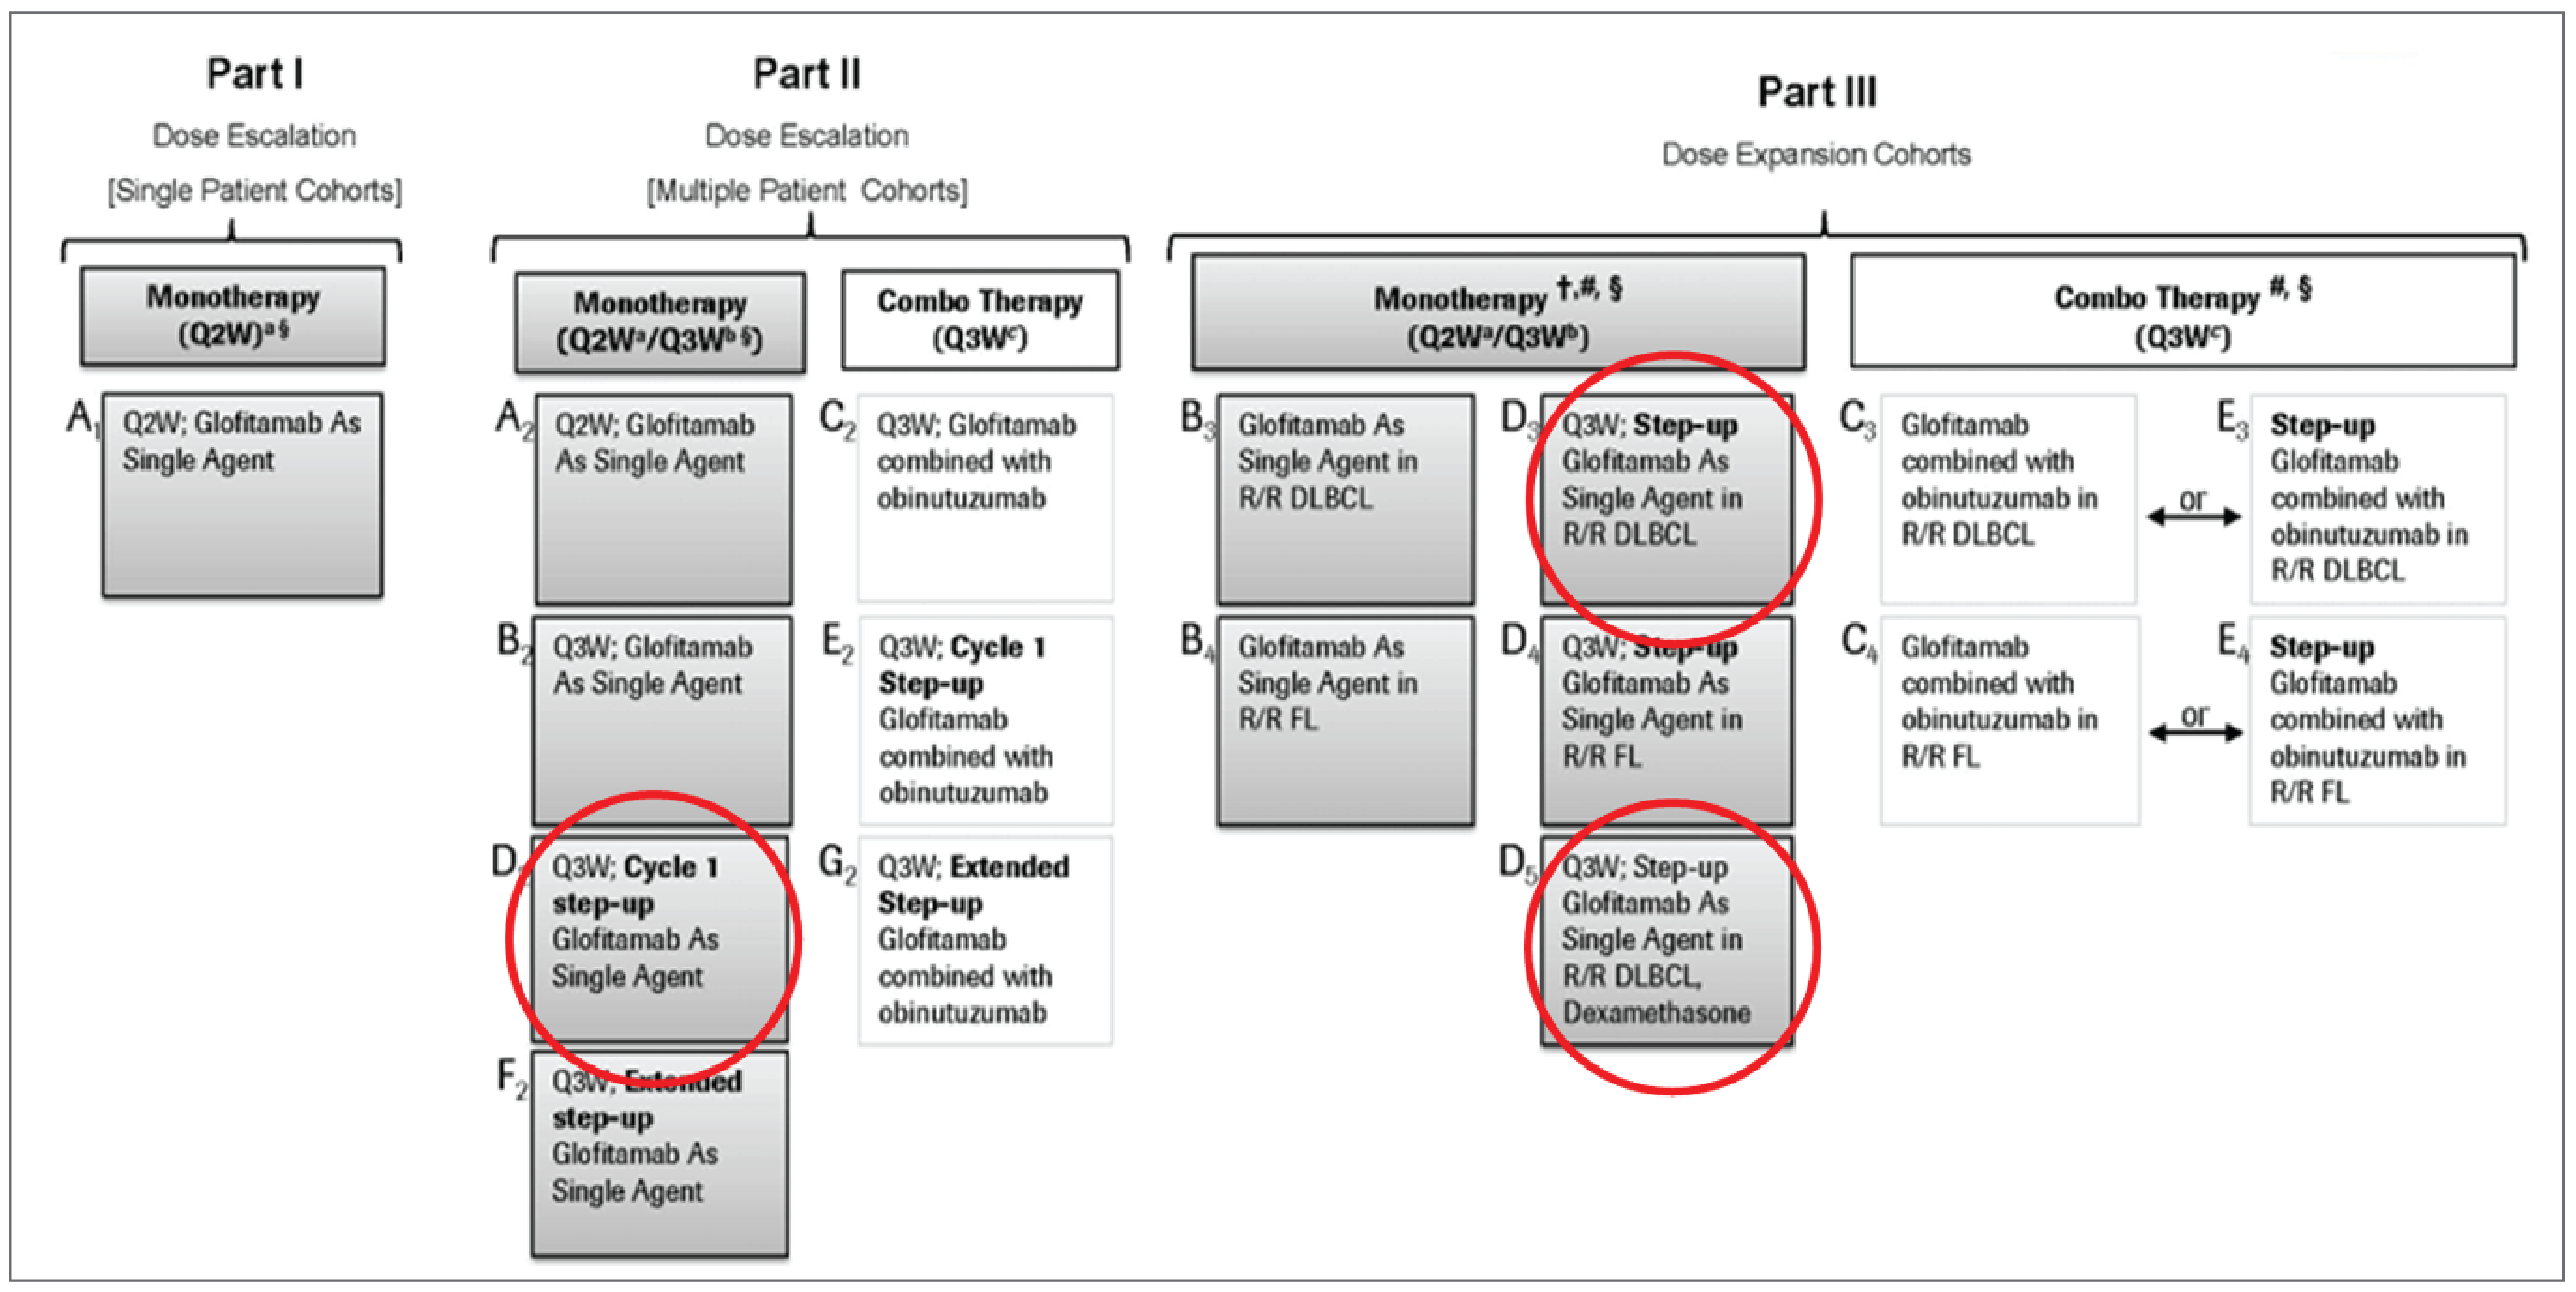 Schematic of the design of the NP30179 study. The cohorts of interest to this review were cohorts D2 (subcohort 2, not included in figure), D3, and D5. Cohort D2S2 was included in Part II of the NP30179 study, while cohorts D3 and D5 (dose expansion cohorts) were included in Part III.